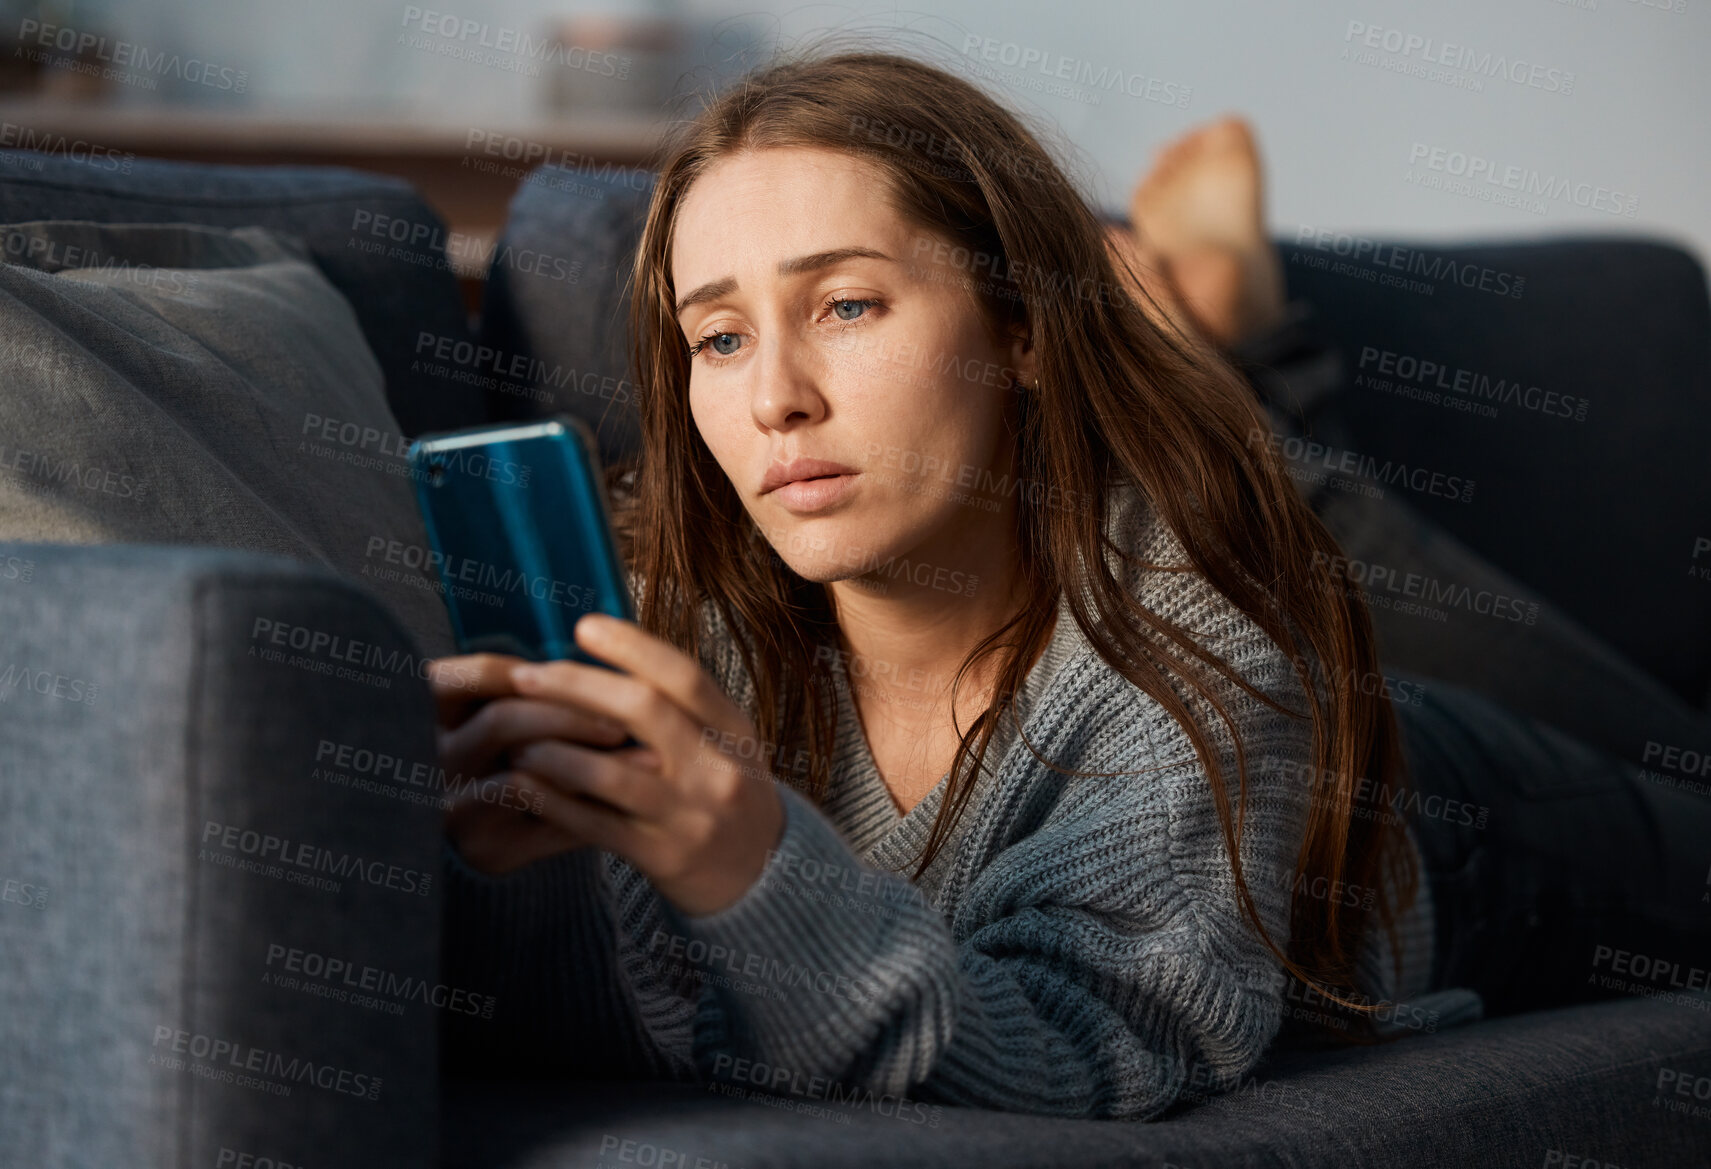 Buy stock photo Shot of a young woman looking depressed while using her smartphone